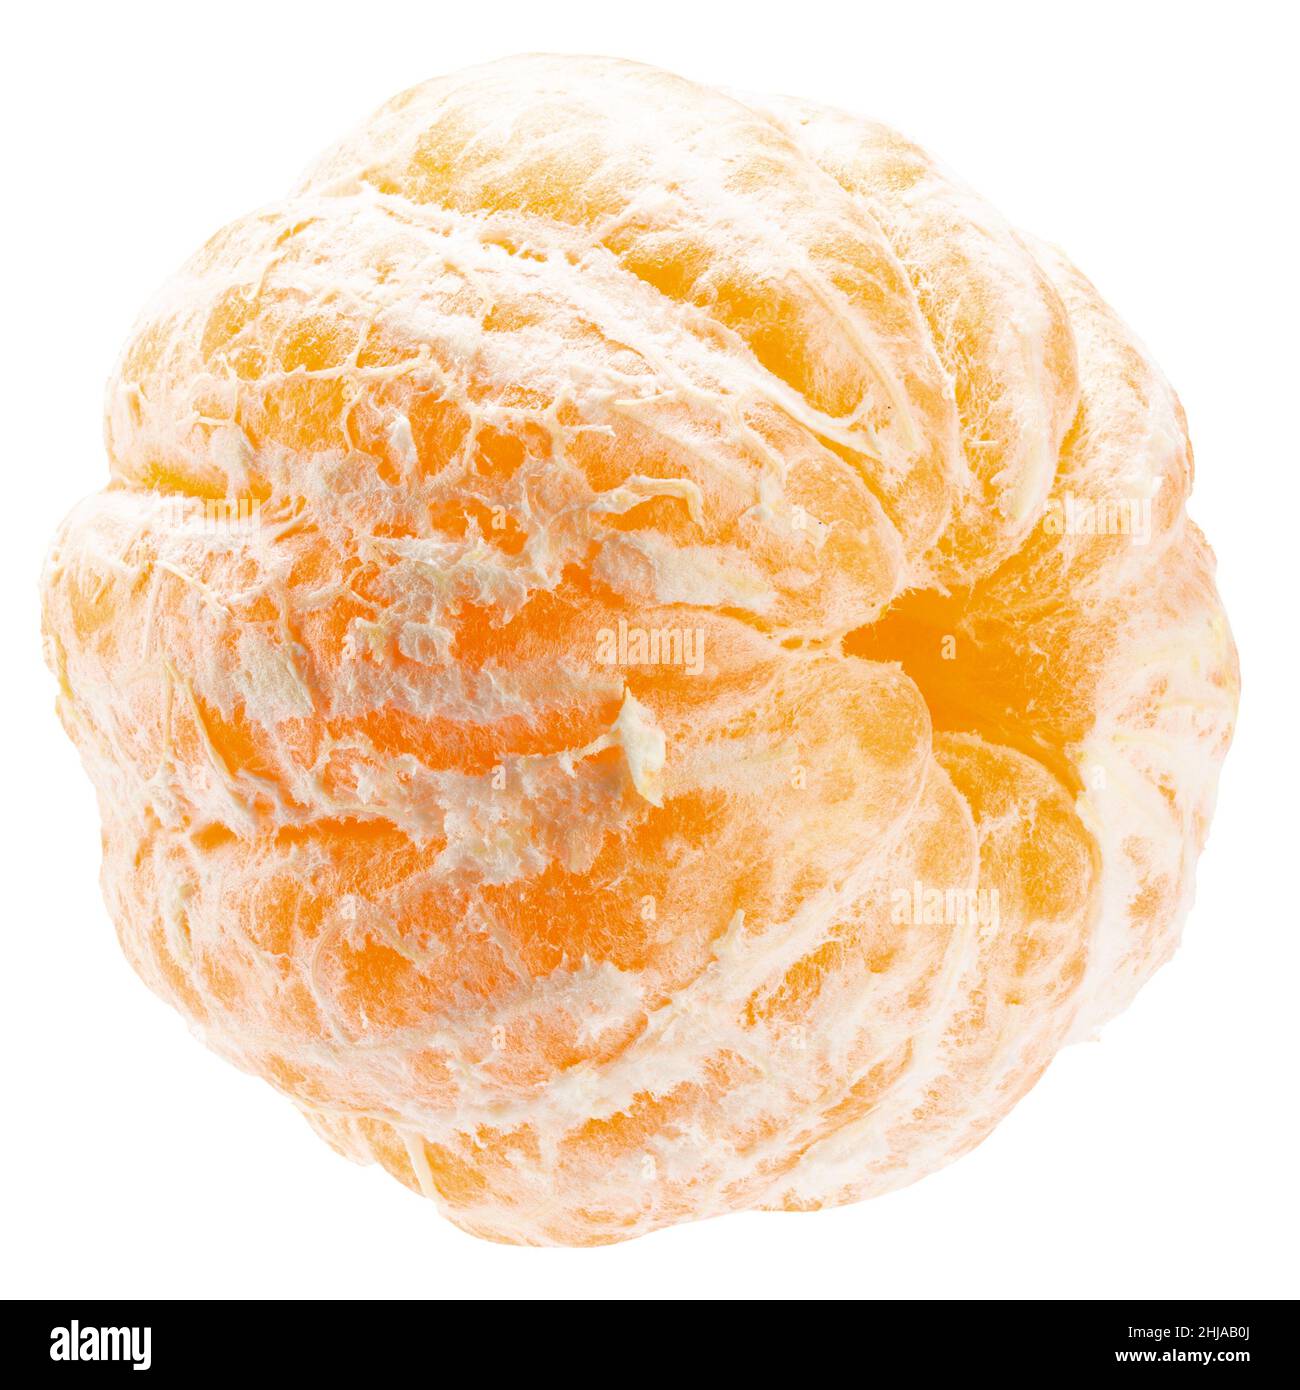 sweet tangerine peeled segments isolated on a white background with clipping path. Stock Photo